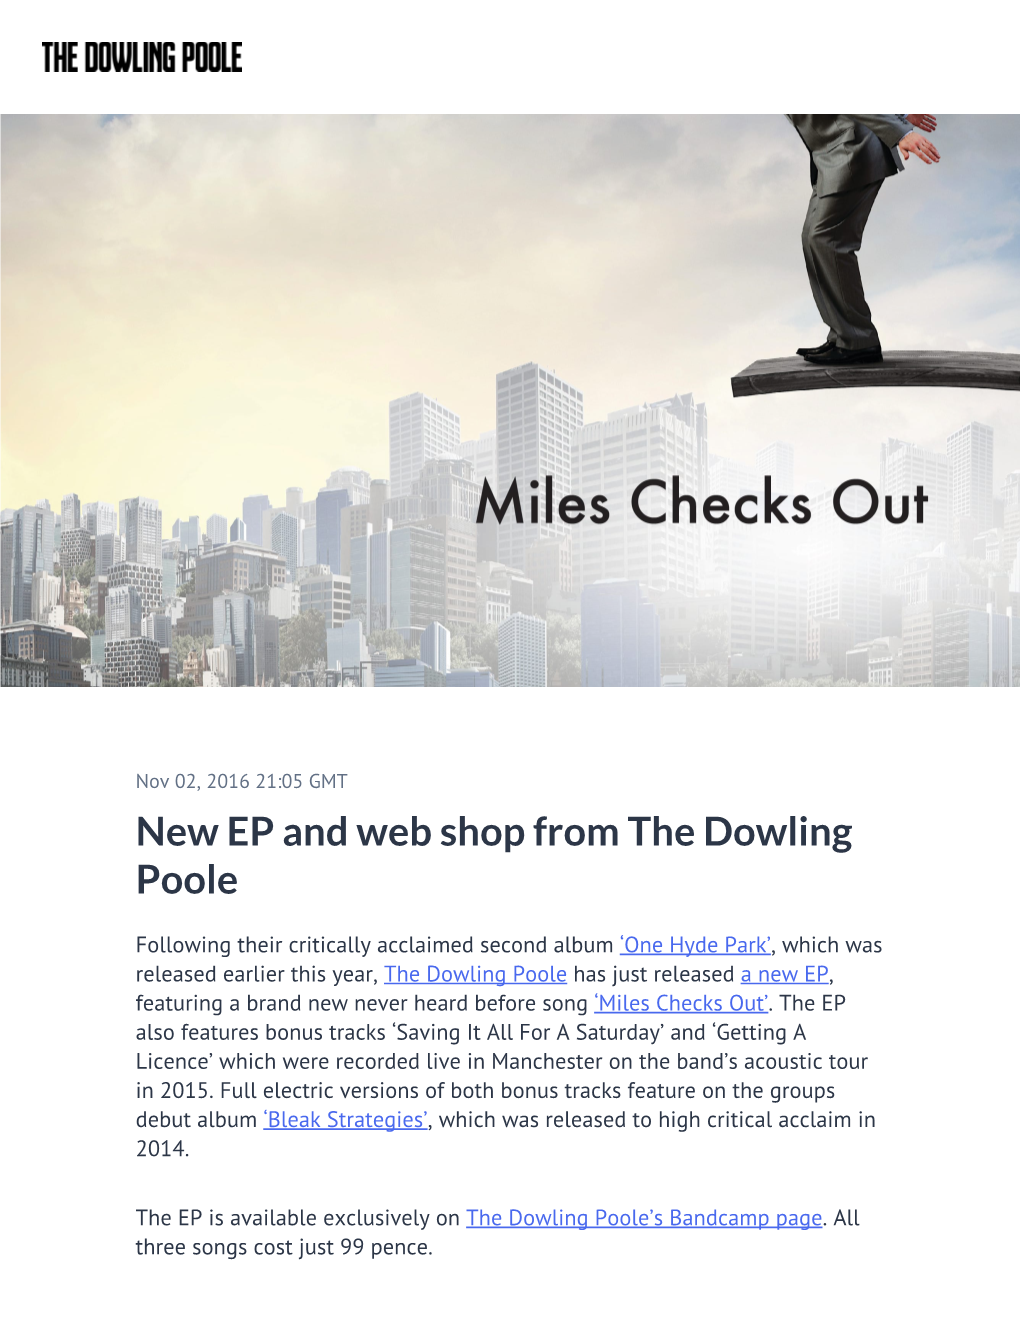 New EP and Web Shop from the Dowling Poole